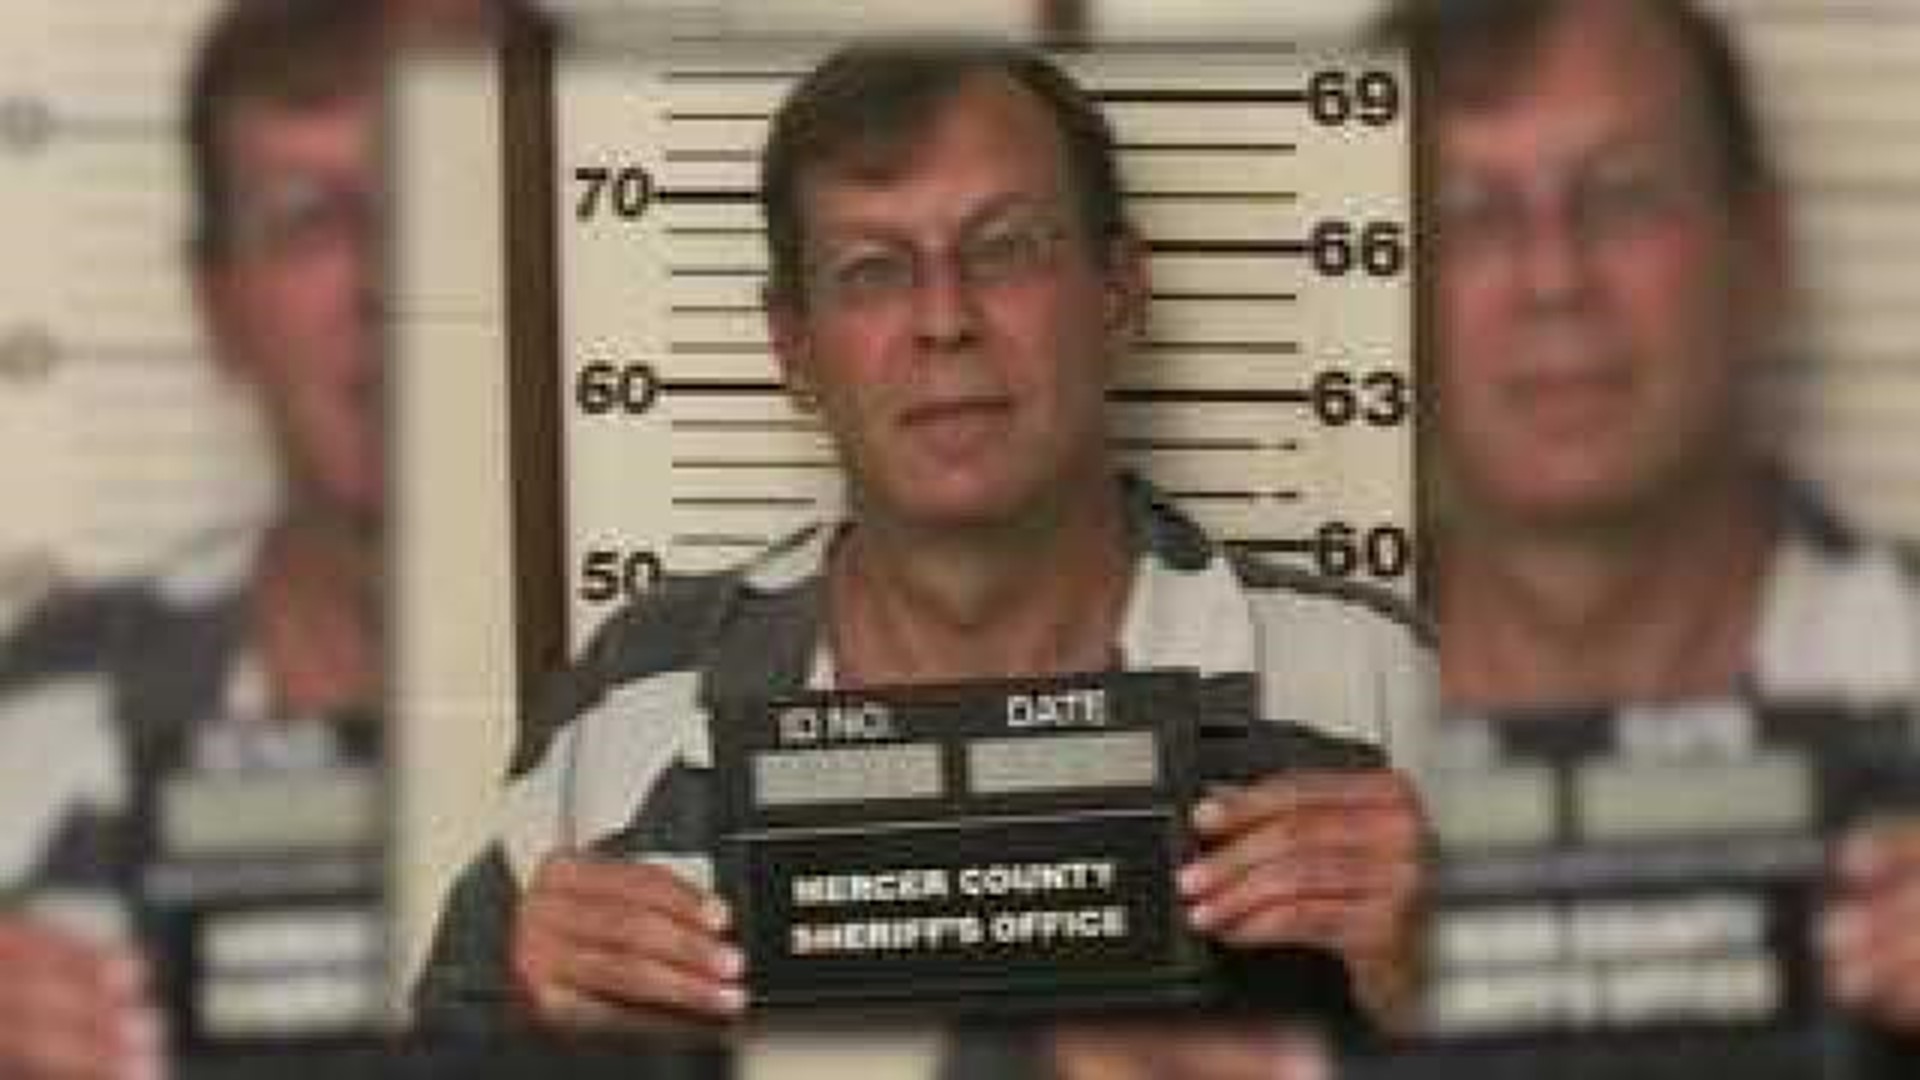 Mercer County Treasurer charged with theft